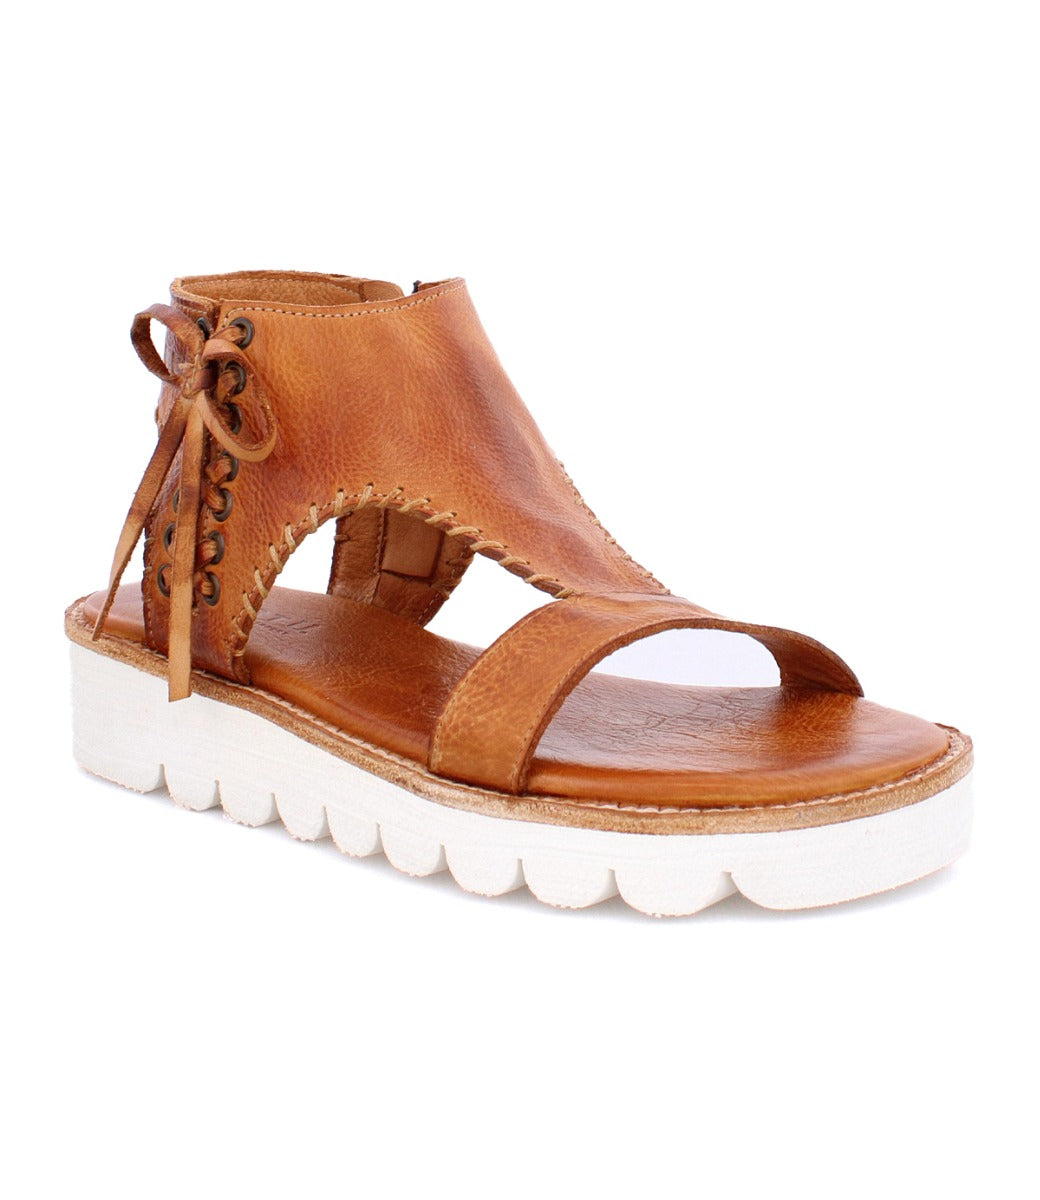 A women's Zoe II tan leather sandal with white soles by Bed Stu.